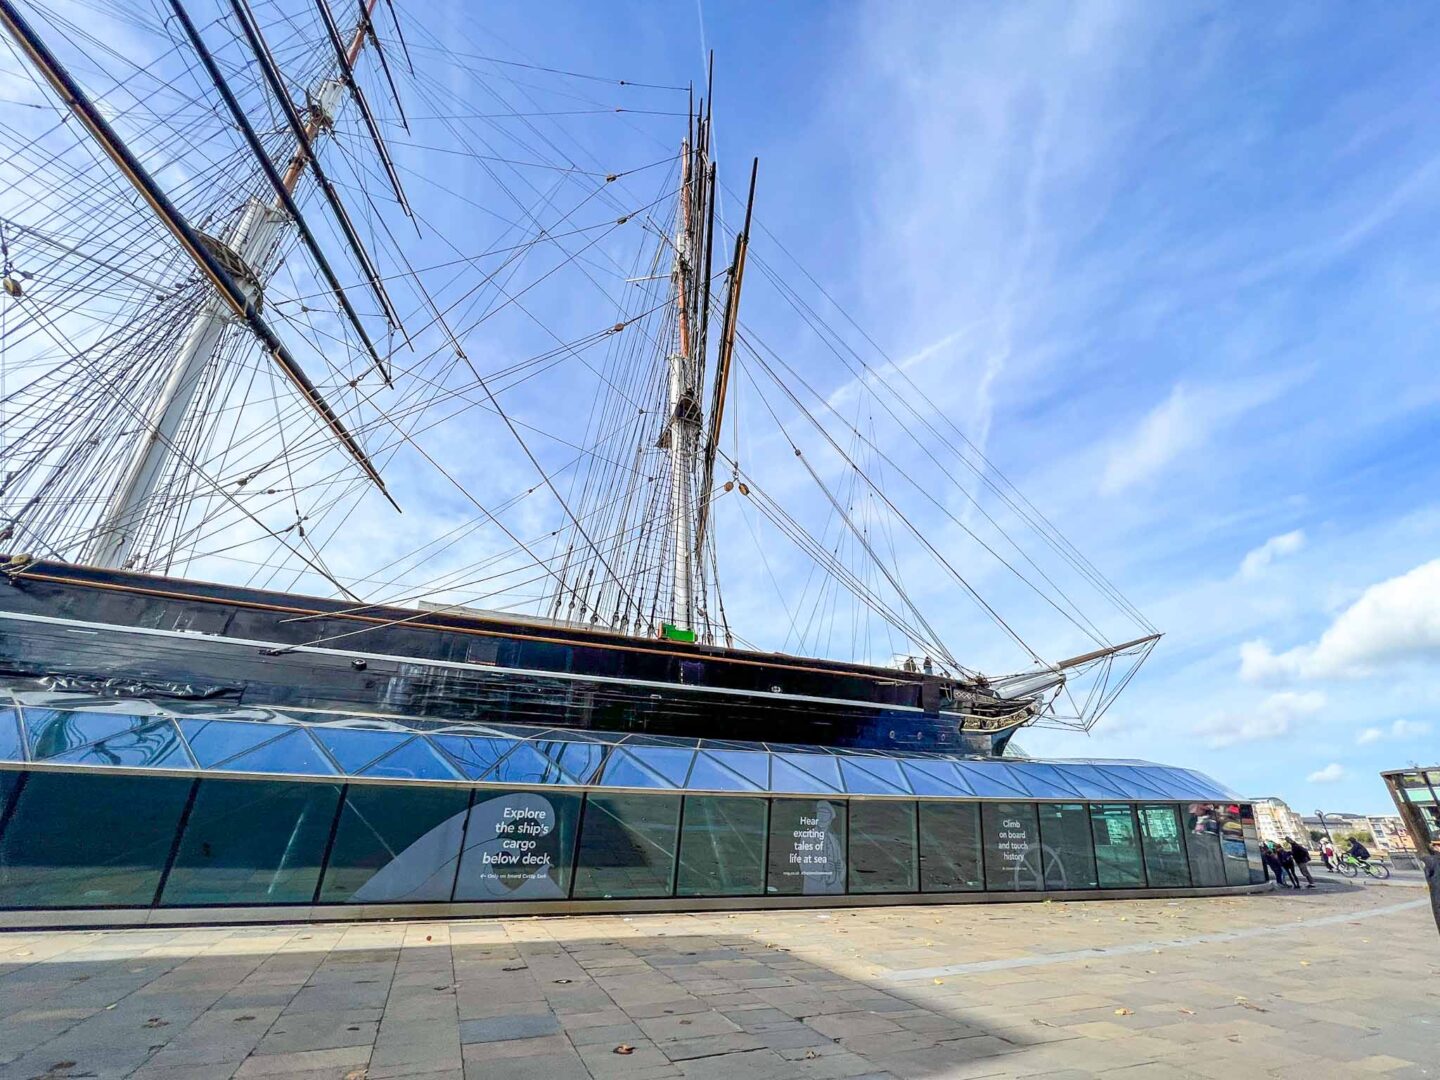 Cutty sark museum from outside, London with kids, London with kids itinerary, 